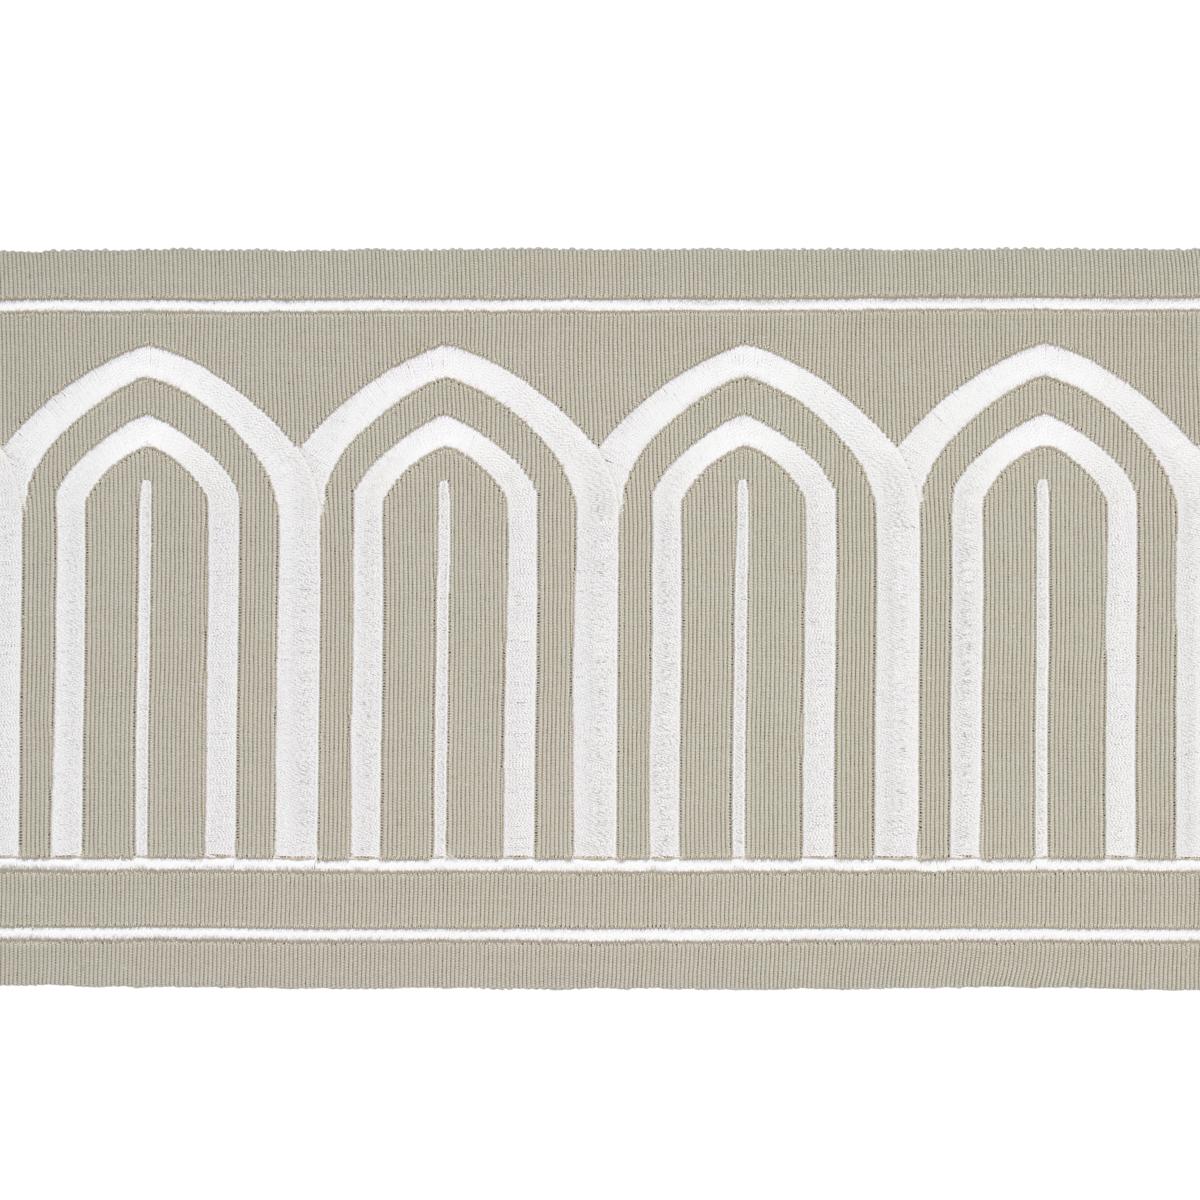 ARCHES EMBROIDERED TAPE WIDE_TAUPE